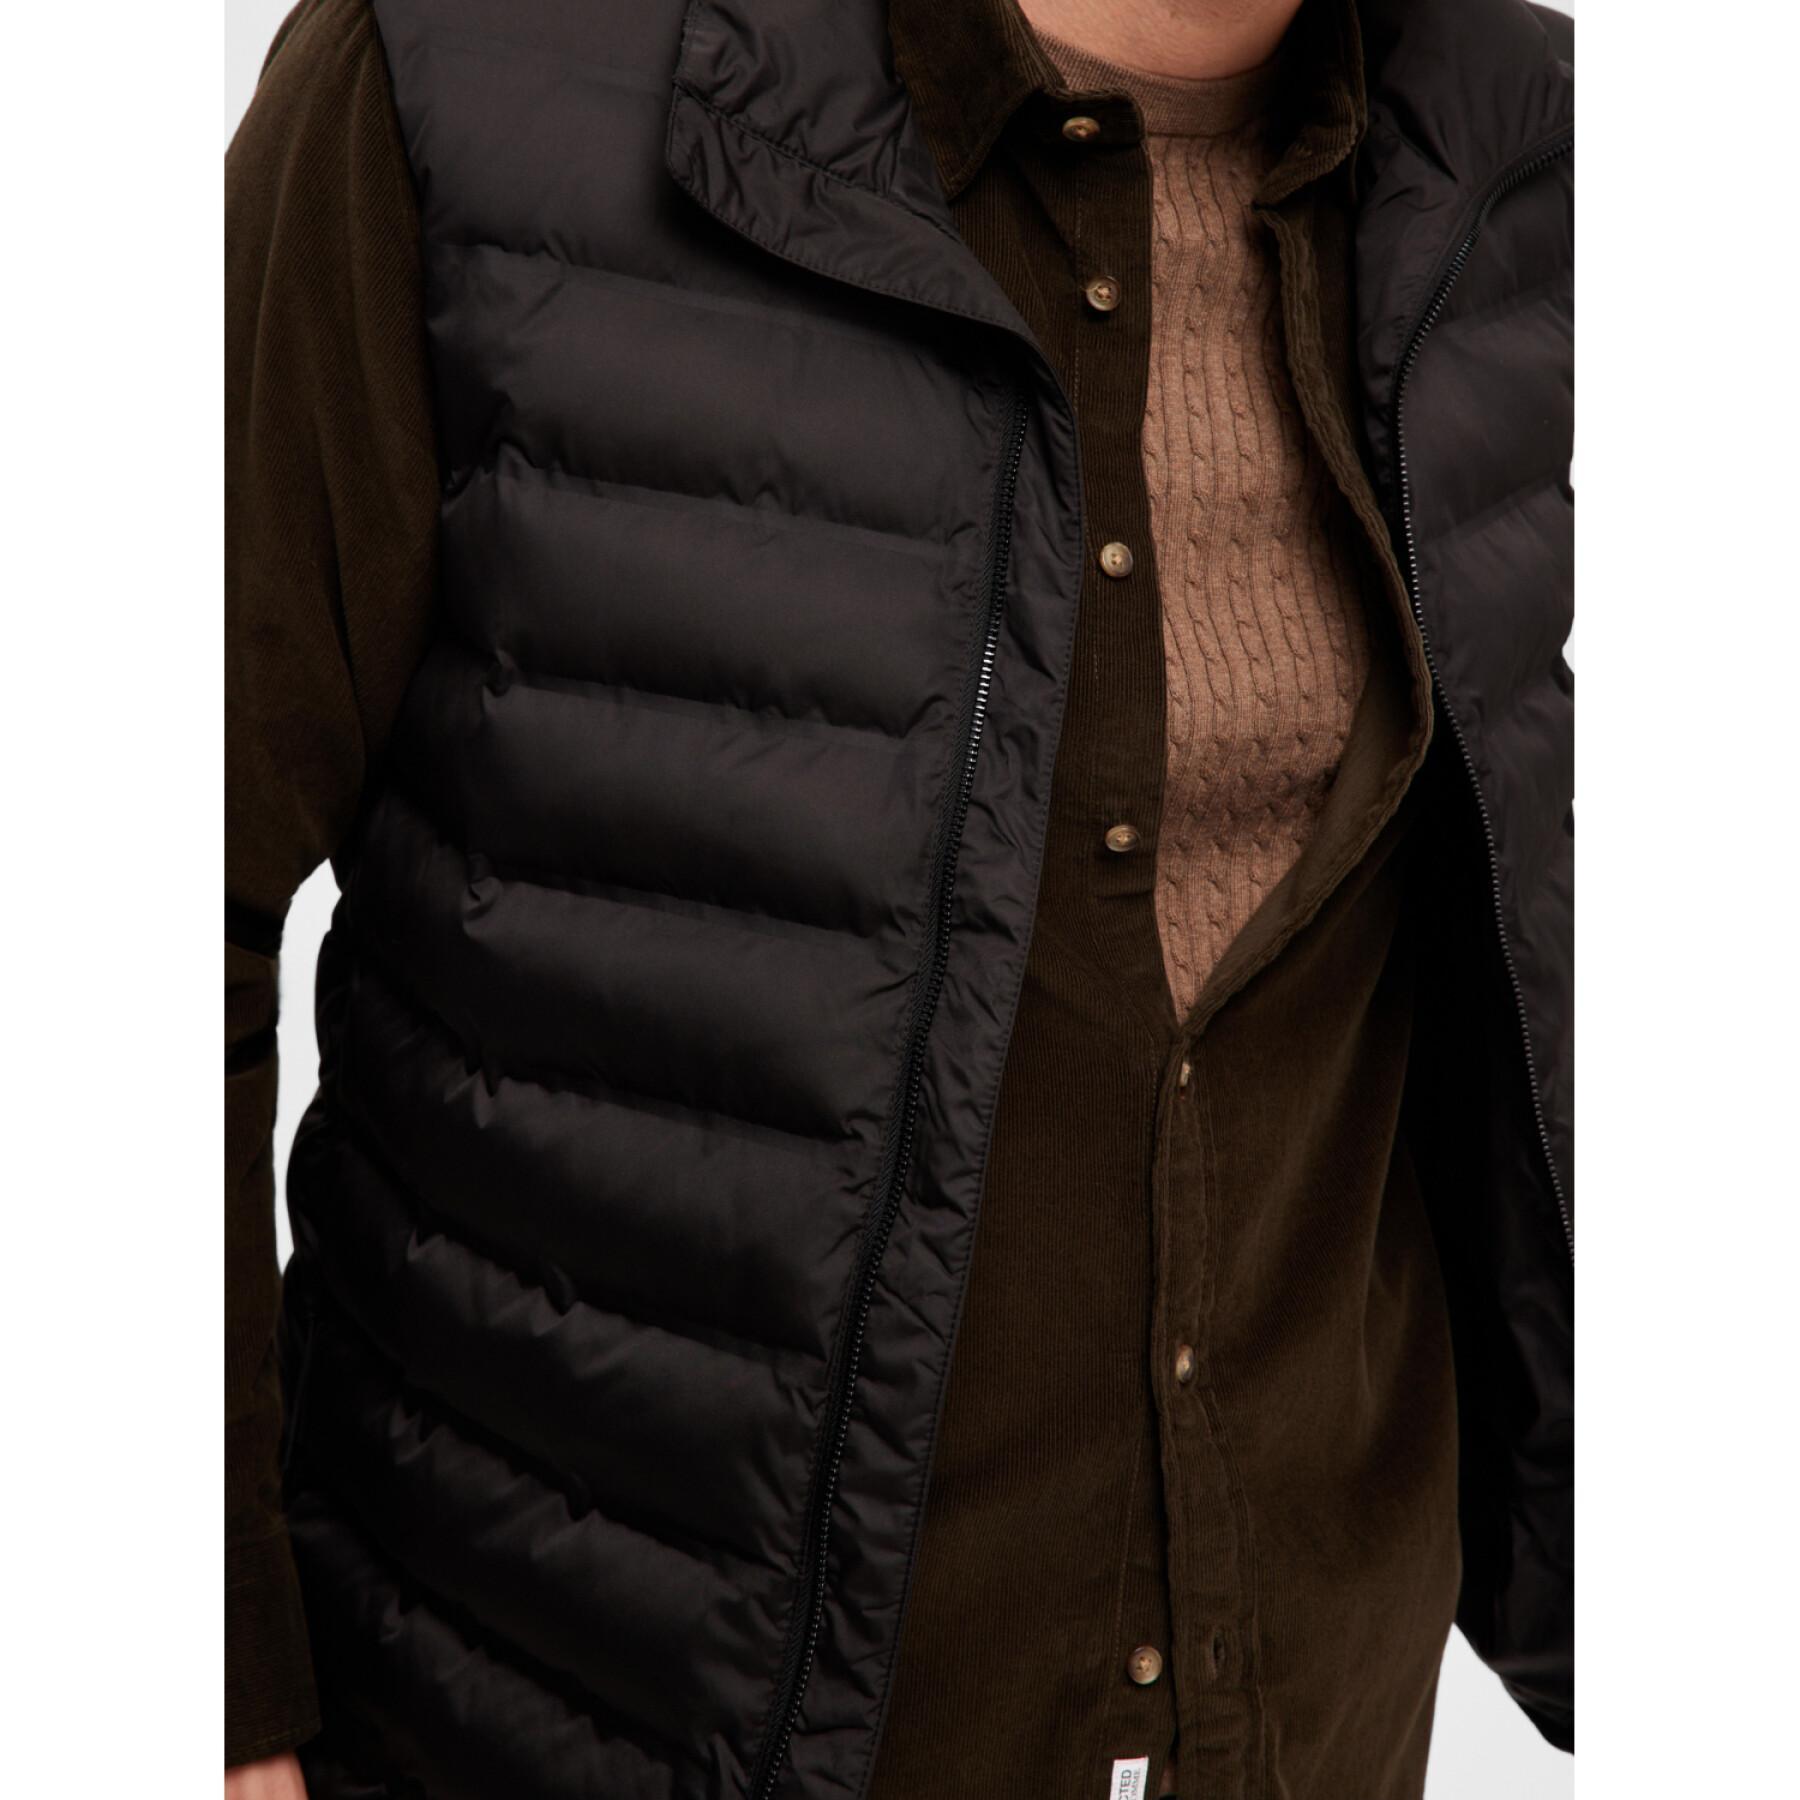 Puffer Jacket Selected Barry